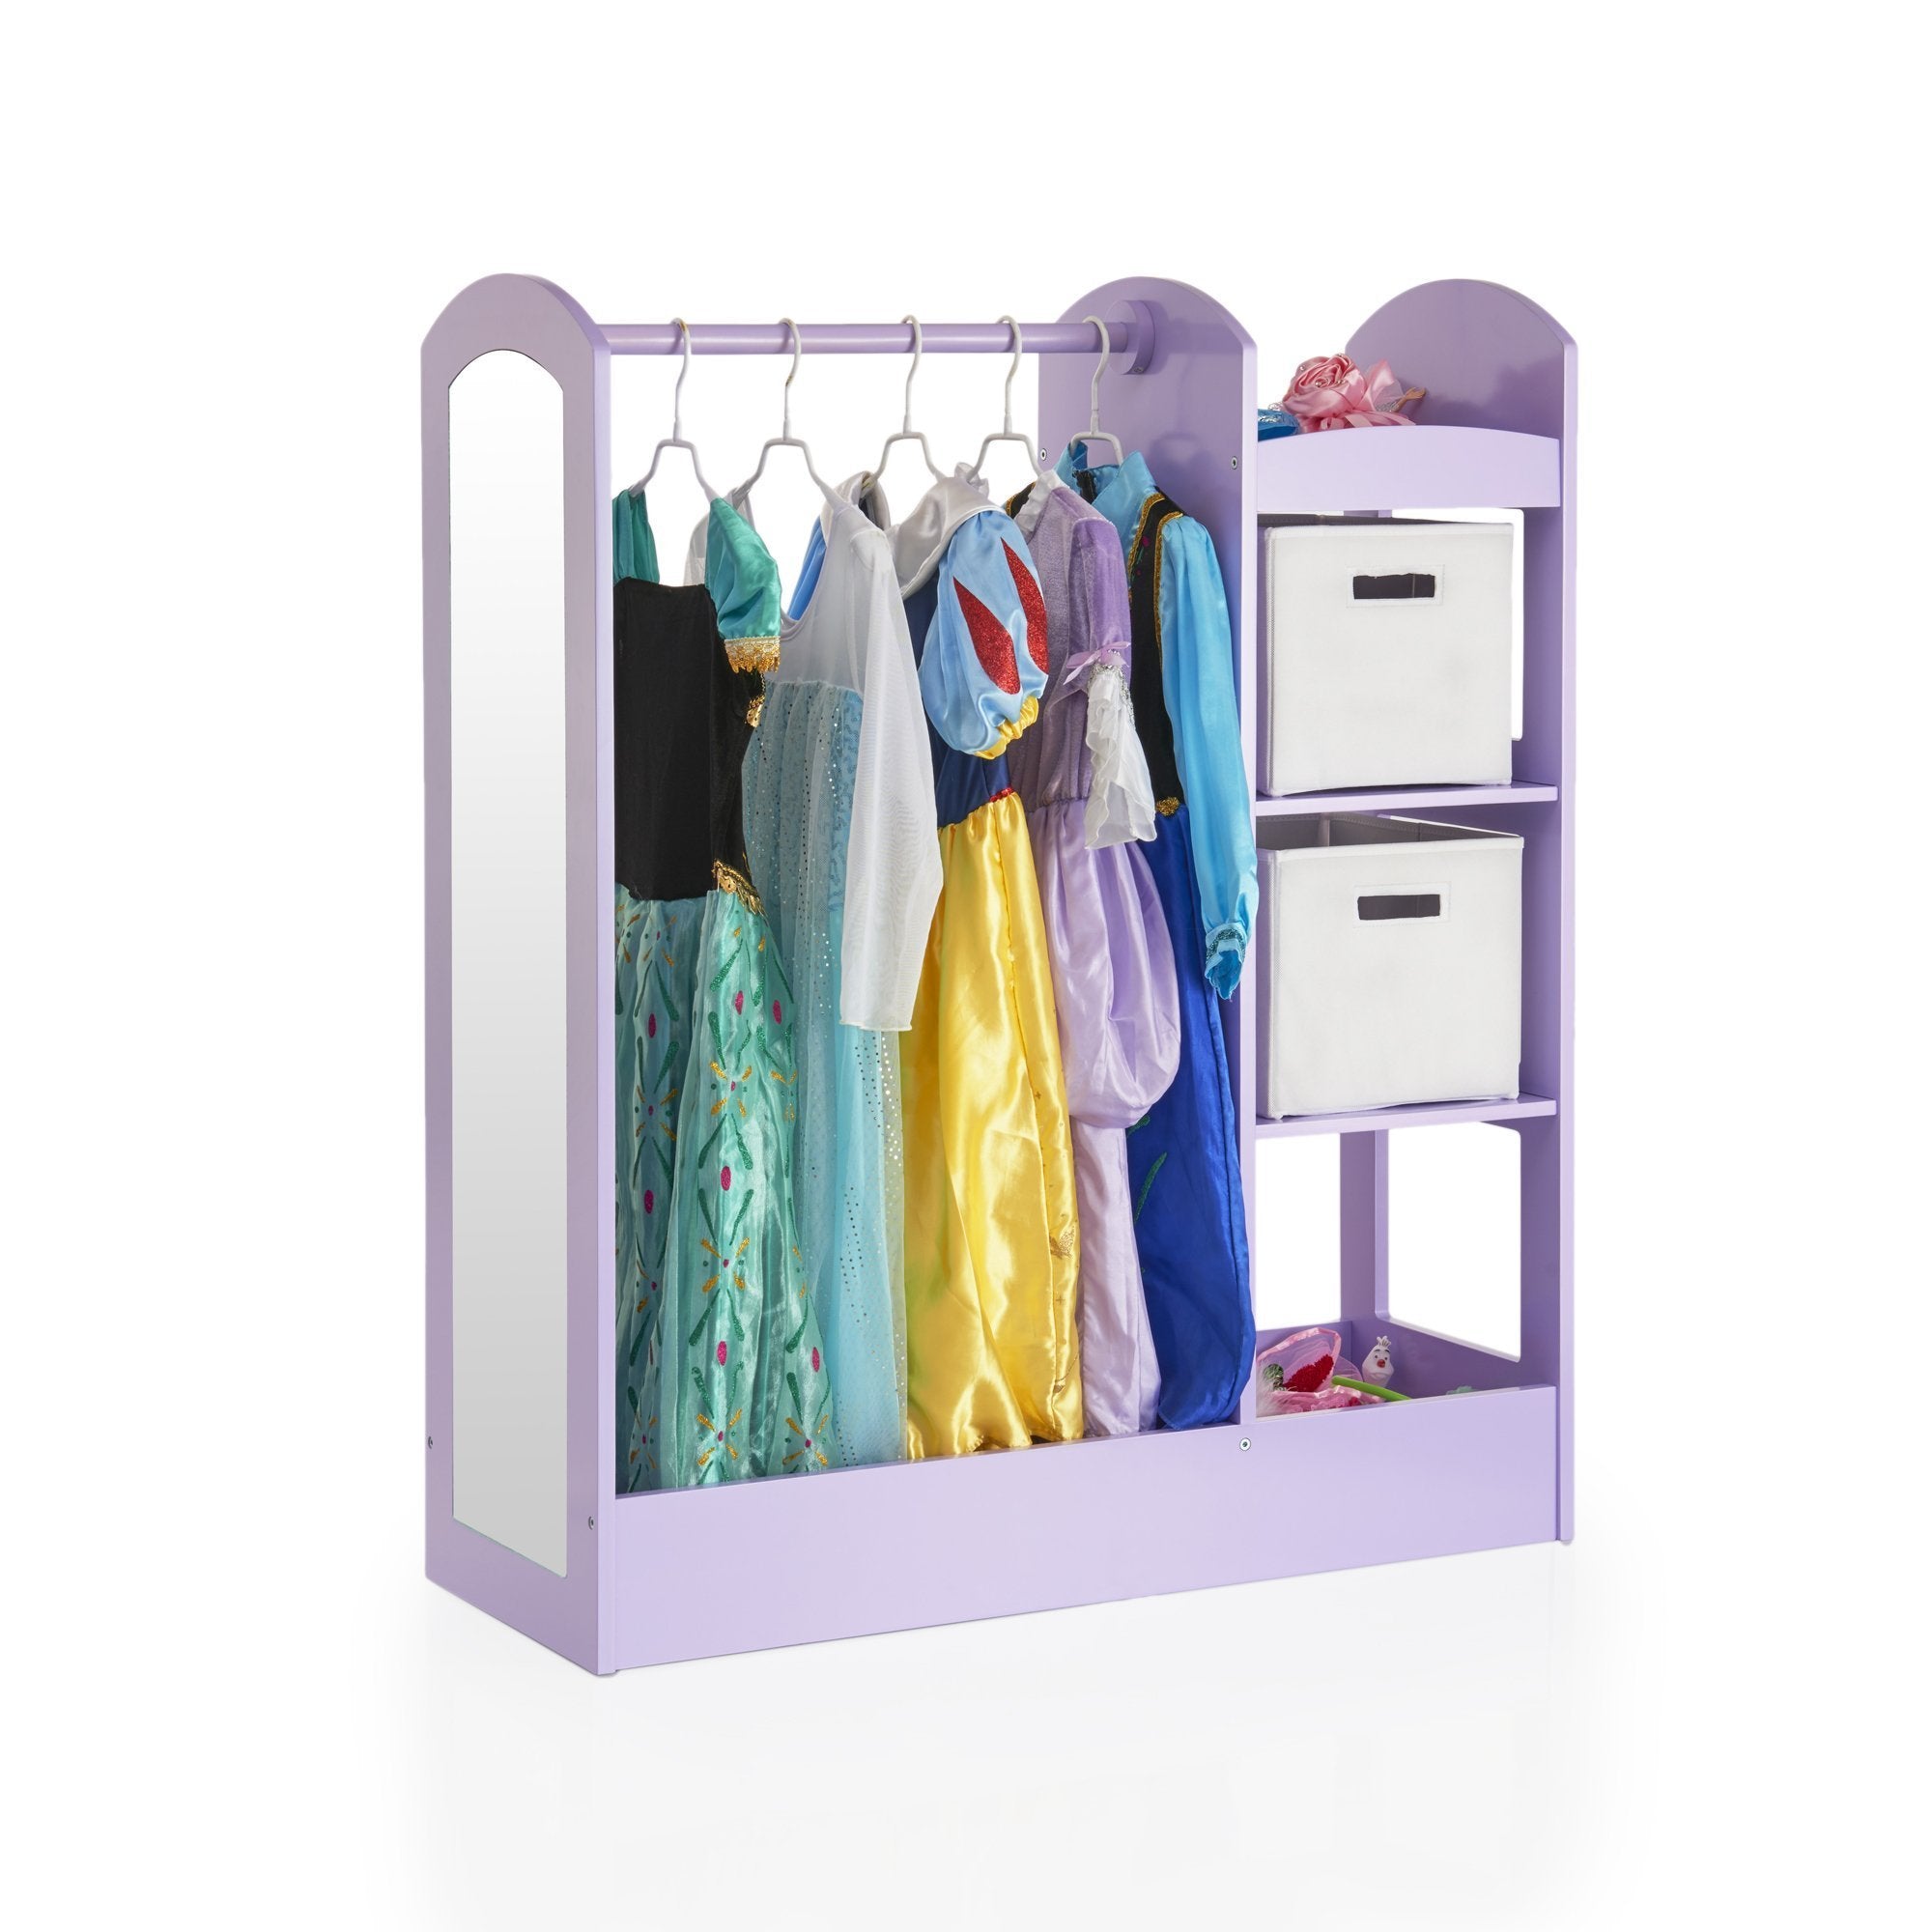 Top rated guidecraft see and store dress up center lavender pretend play storage closet with mirror shelves armoire for kids with bottom tray costume storage dresser